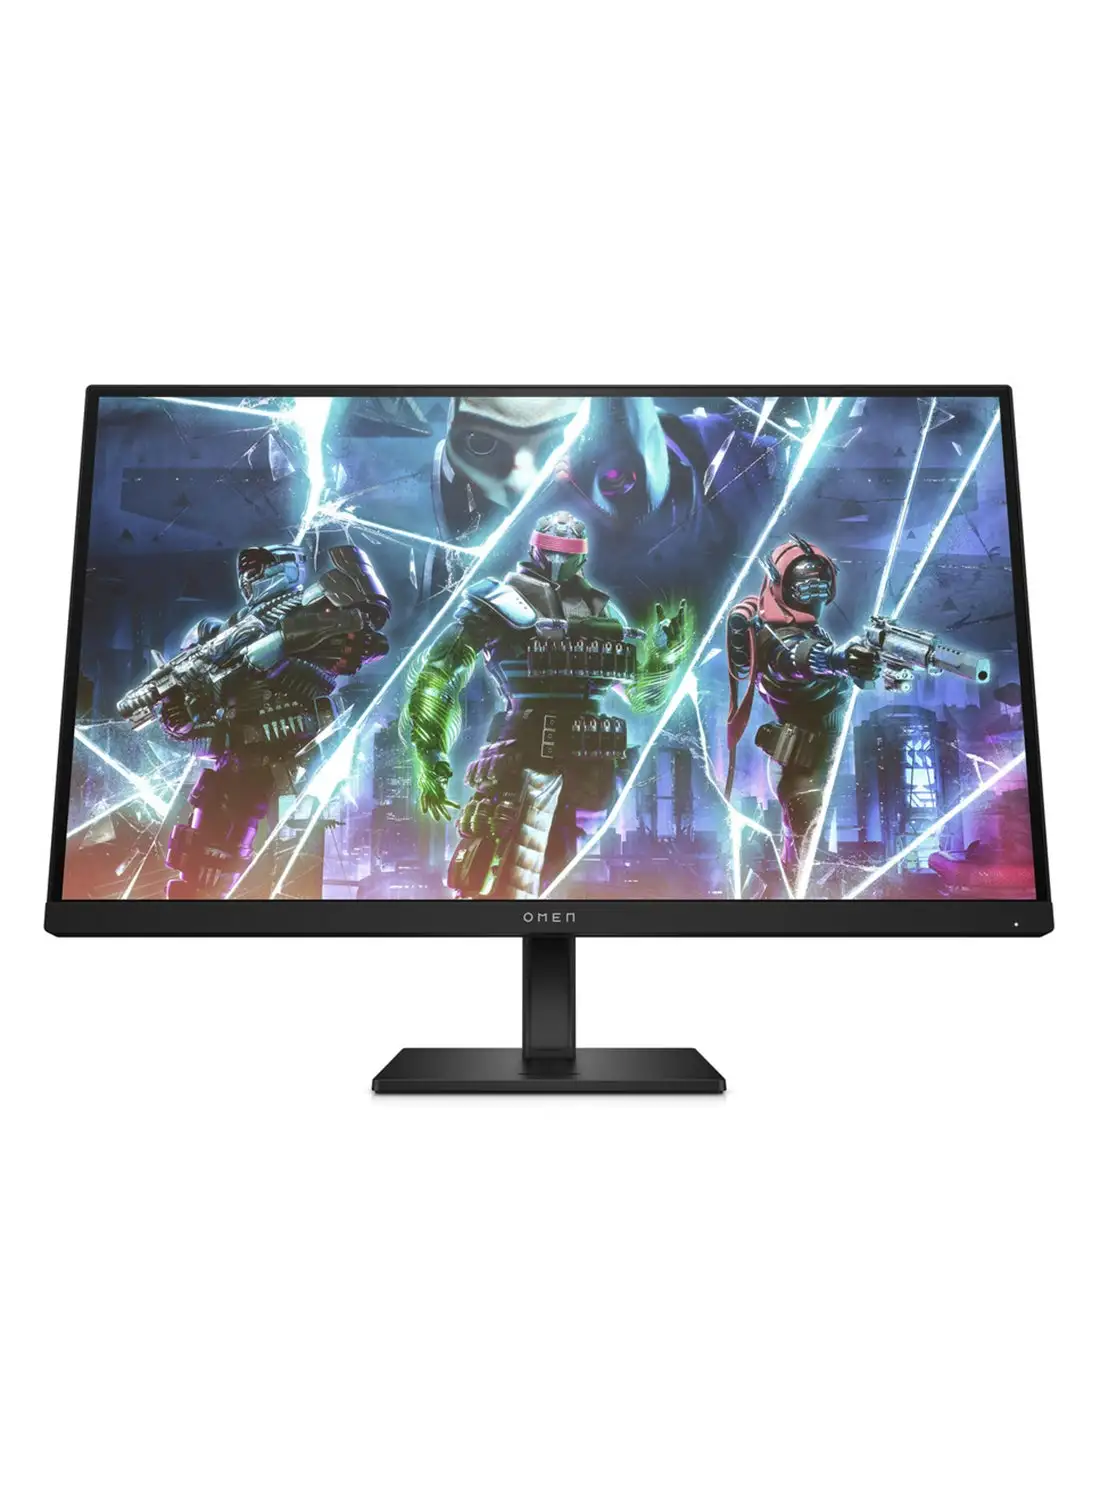 HP Omen Gaming Monitor, 27 Inch FHD 1920x1080 HDR, 165Hz Refresh Rate, 1ms GTG Response Time, AMD FreeSync Black